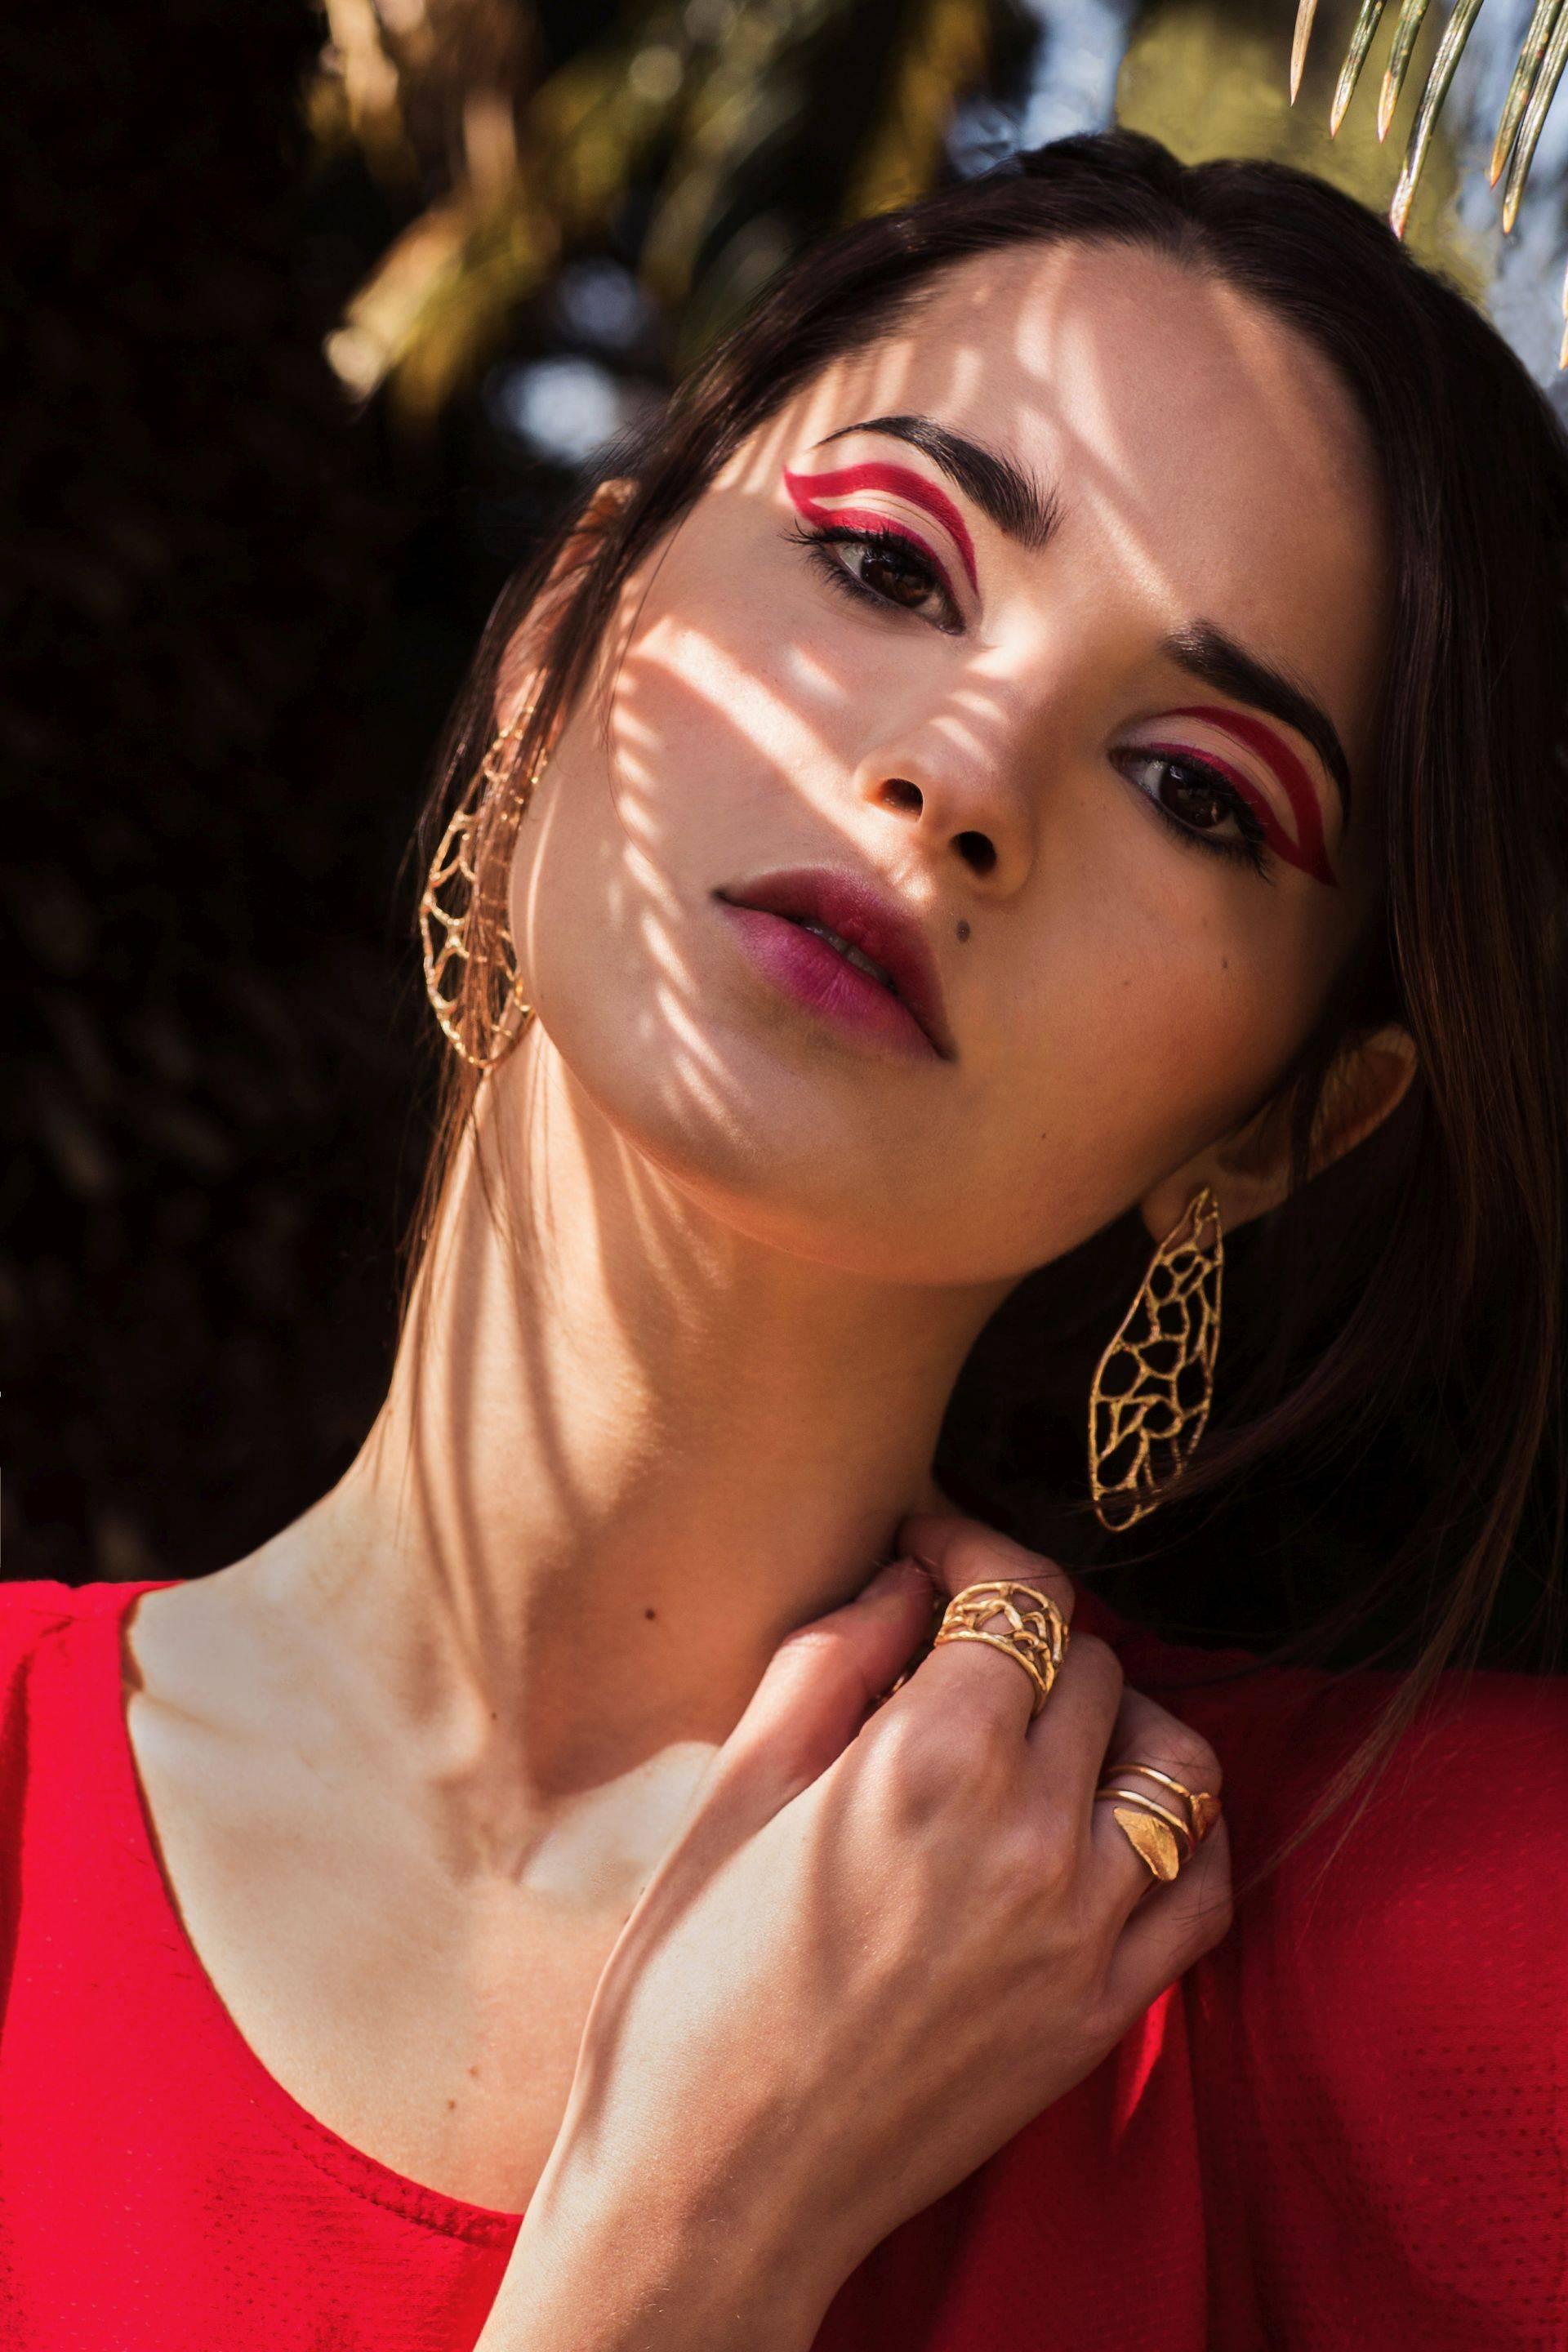 Giulia Barela Africa  Gold Plated Bronze Earrings made in Rome

The Africa collection manages to materialize an eternal passion for travel, curiosity, discovery, exceeding limits, and a constant search for new shapes and forms. The handcrafted, lost